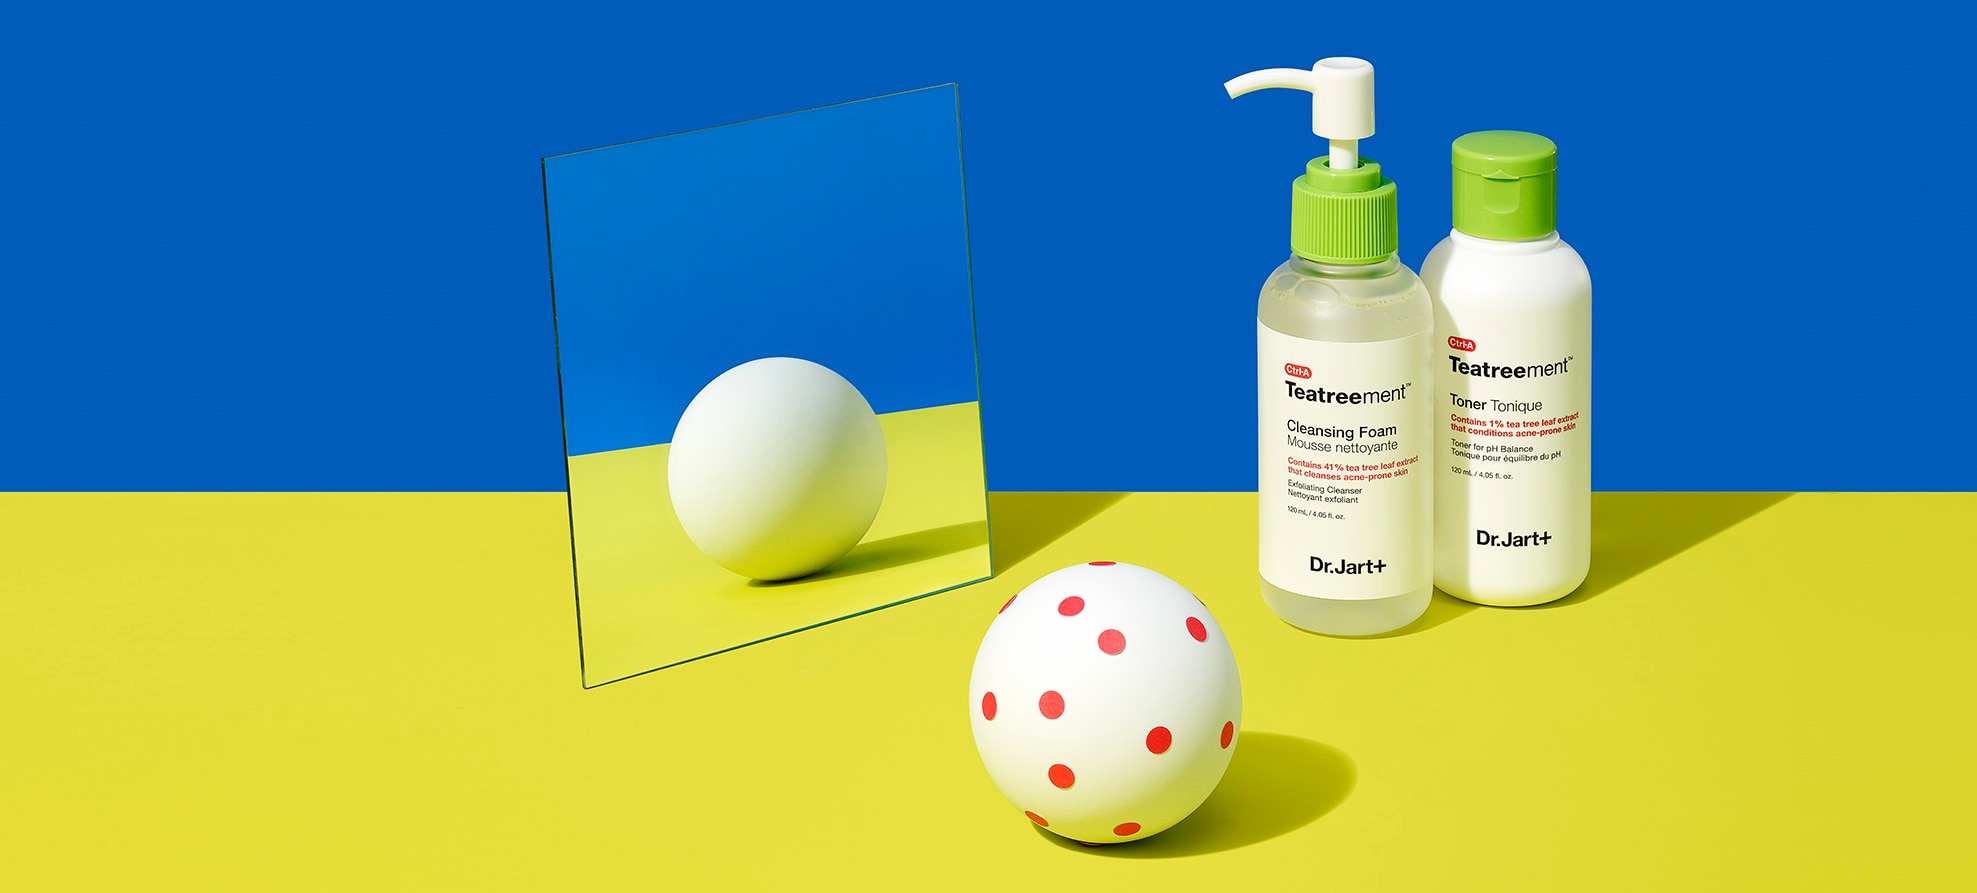 Teatreement cleanser and toner bottles on a bright background in front of a mirror